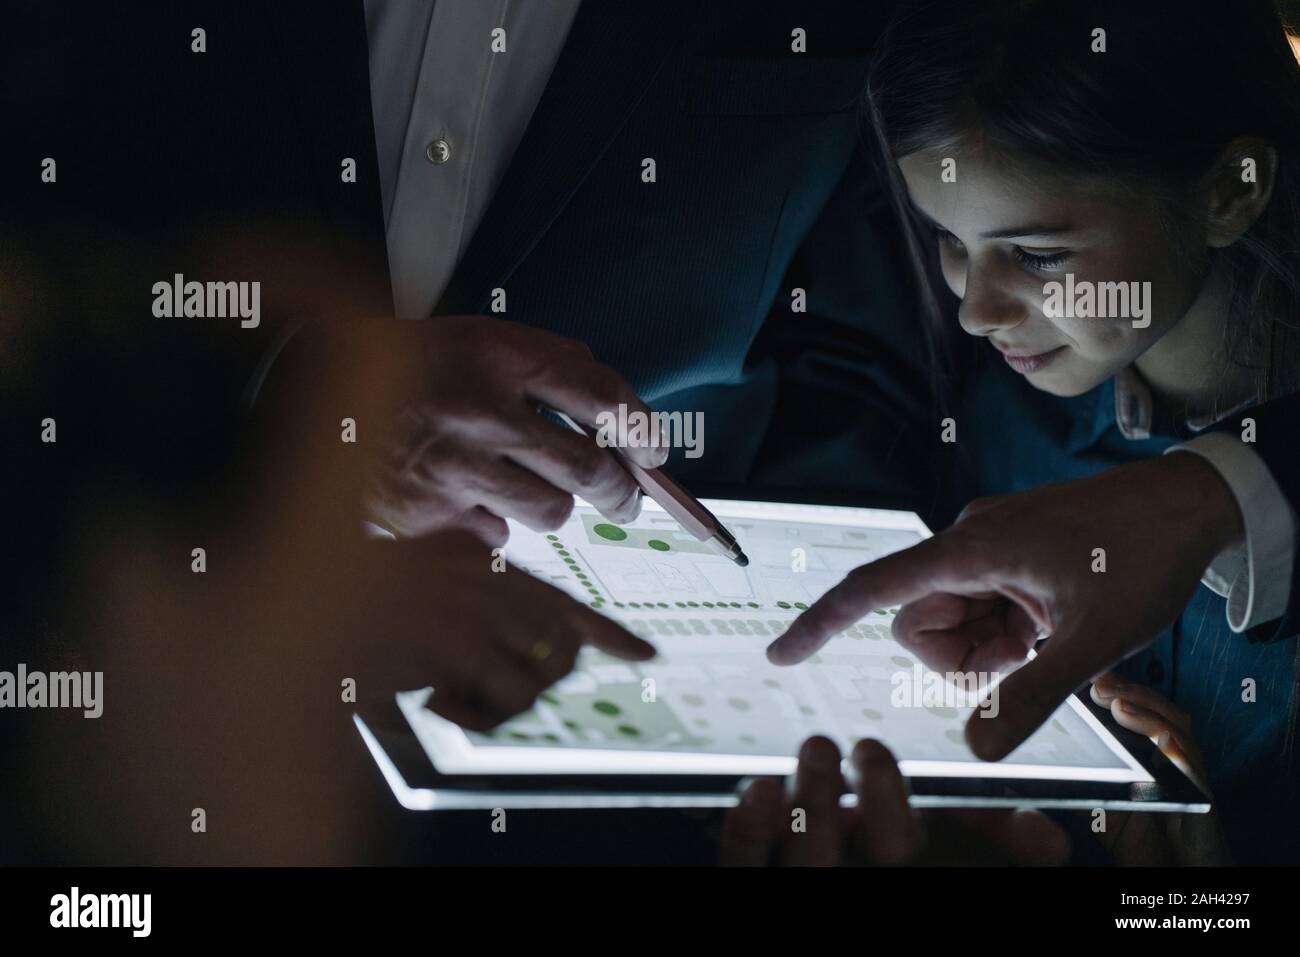 Business people and girl looking at shining construction plan on tablet in office Stock Photo